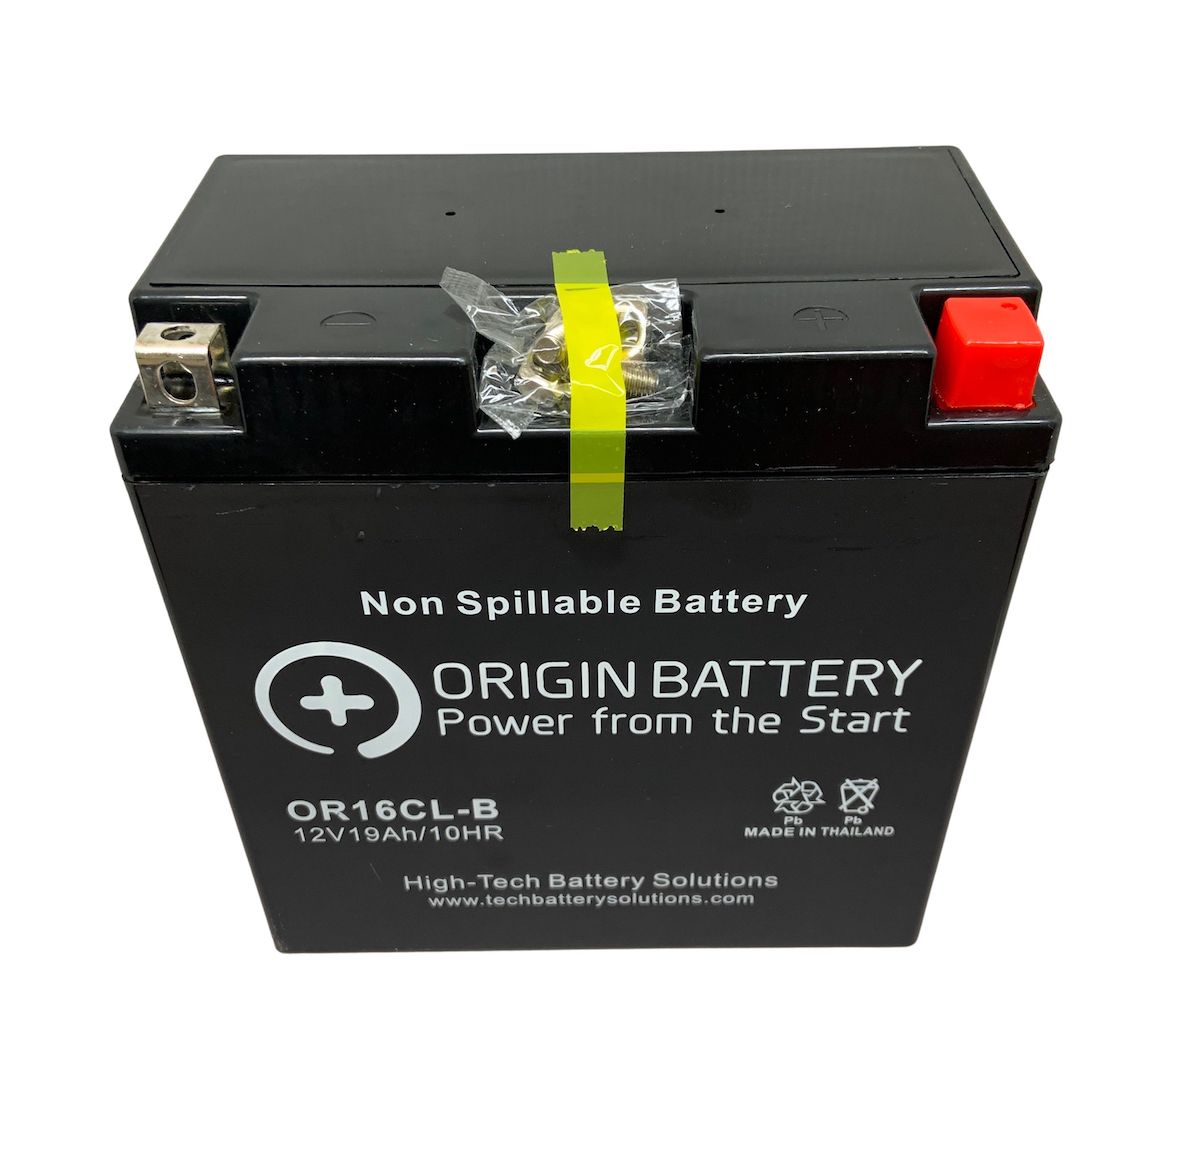 Polaris All Models Battery Replacement (All) Questions & Answers